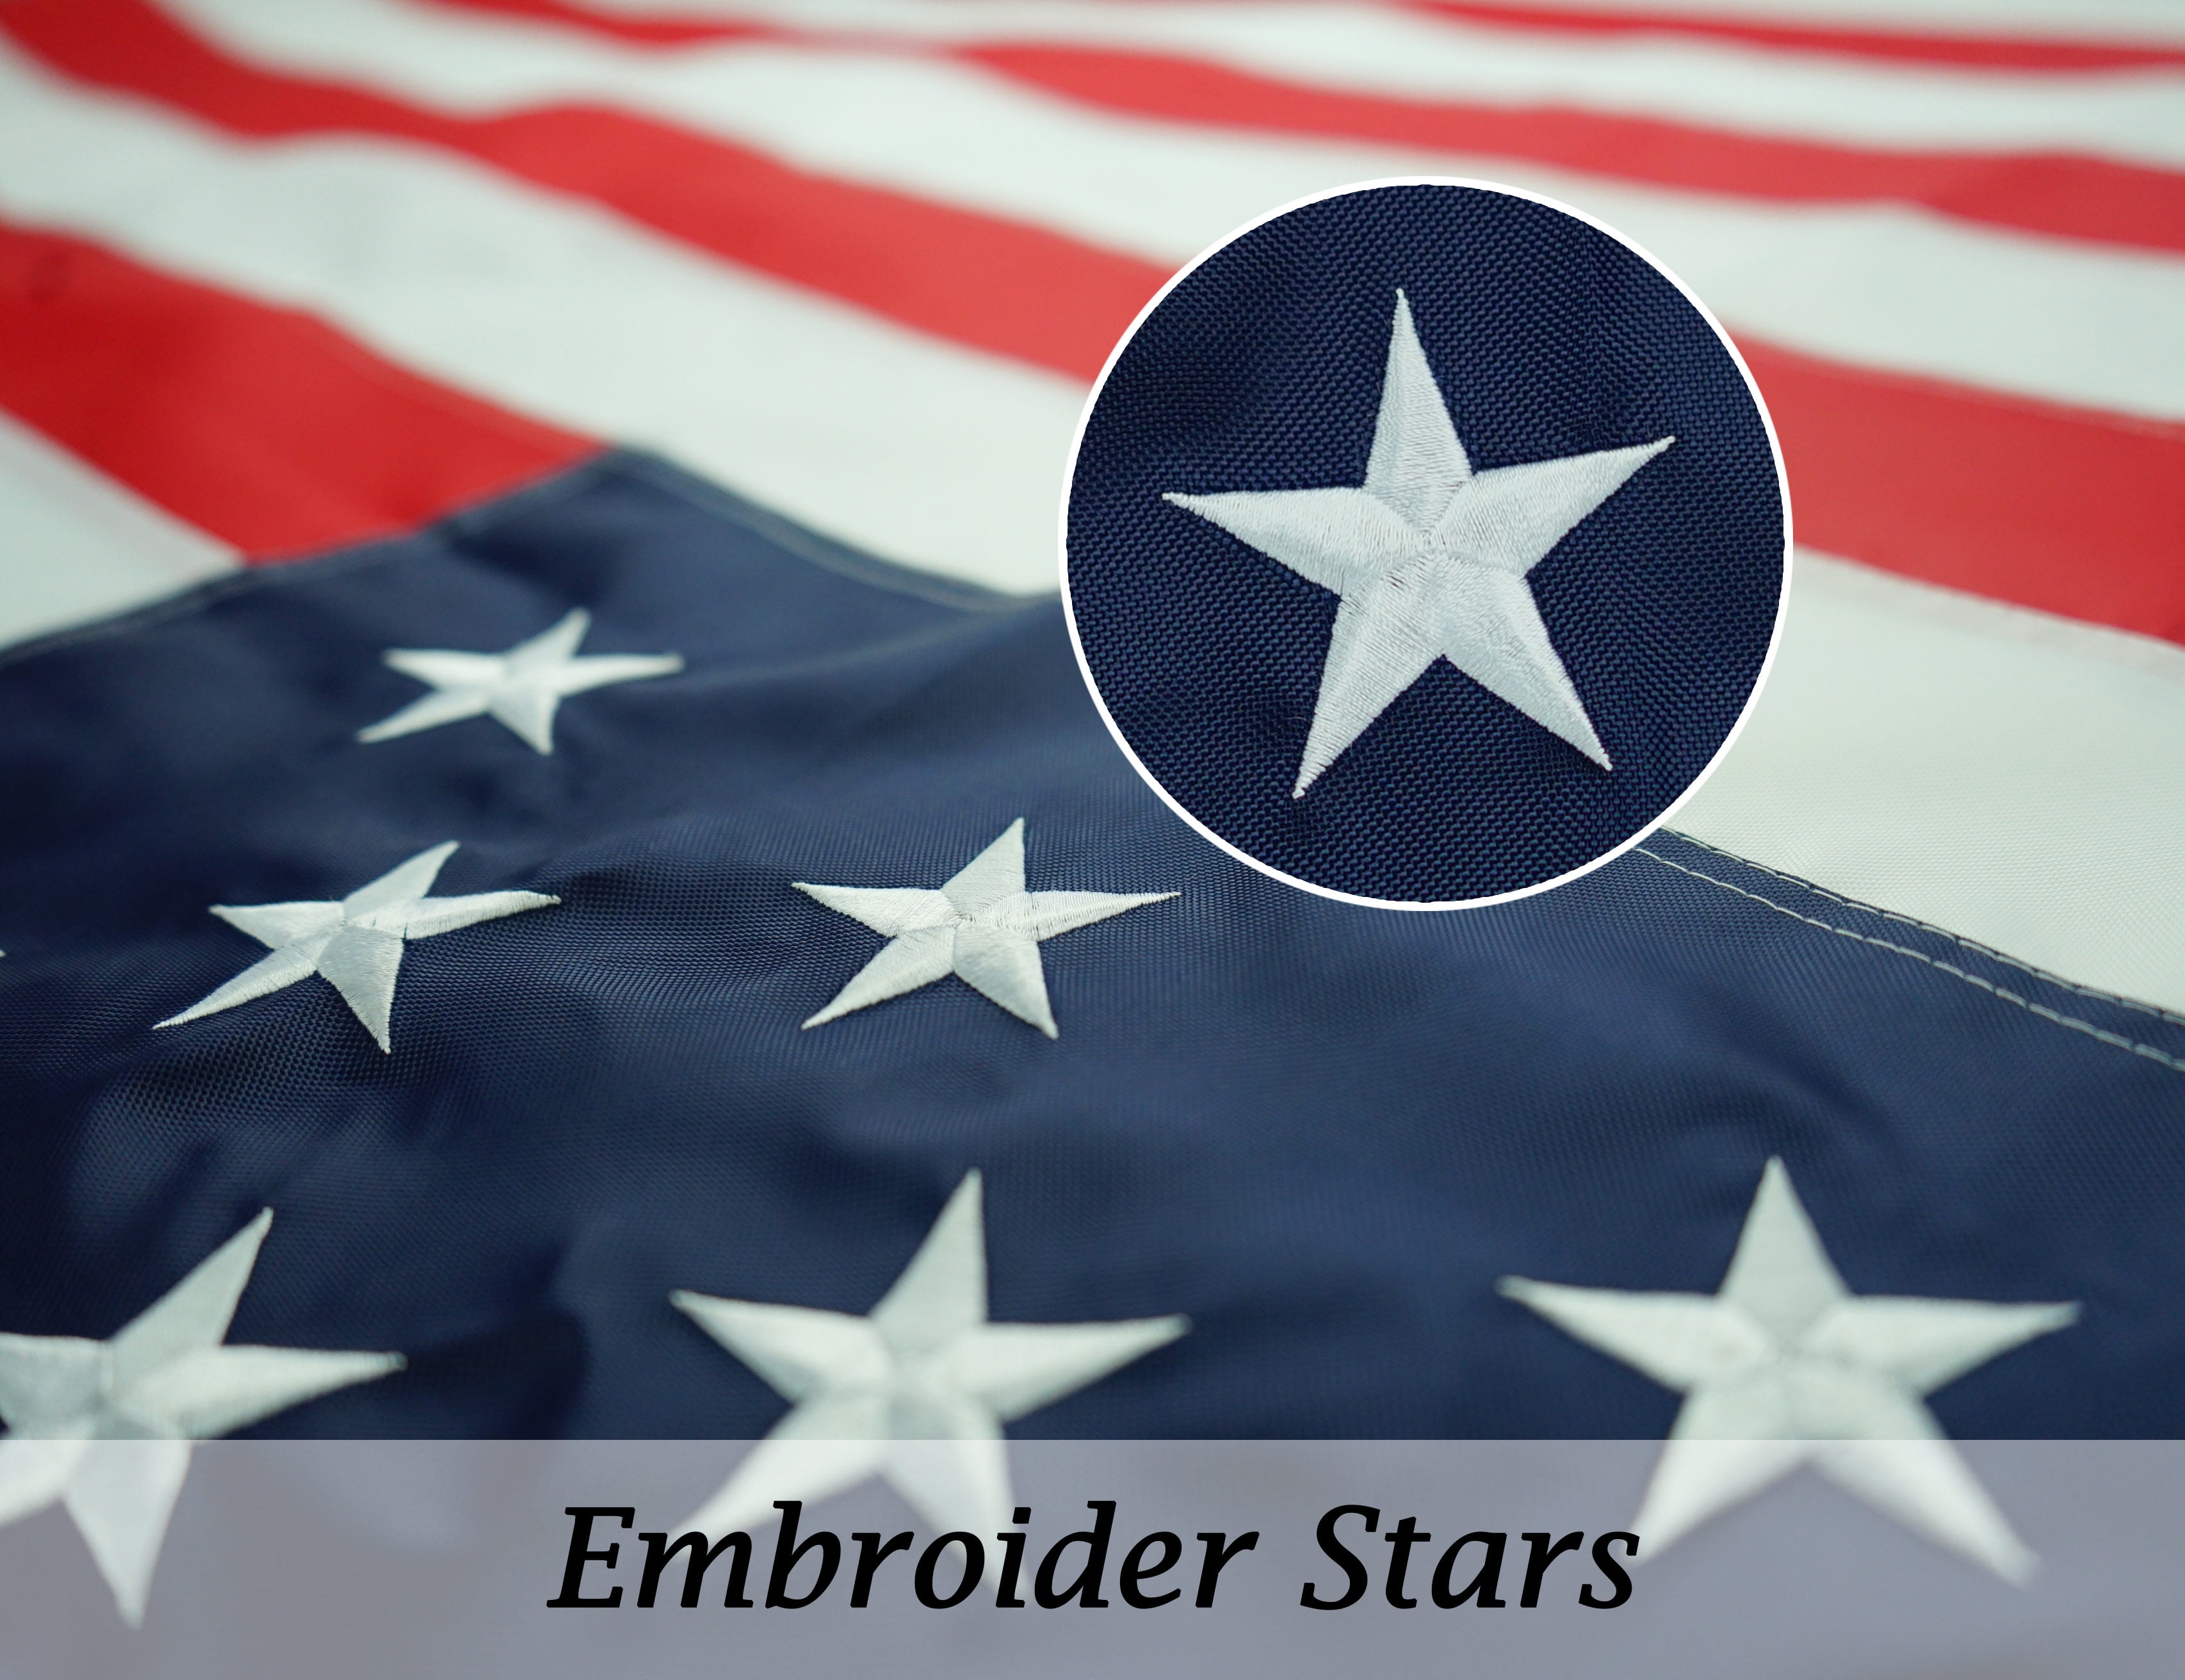 Featuring Embroider Stars and Sewn Stripes and Brass Grommets,UV Protected,Nylon Perfect for Indoor/Outdoor Use. American Flag 3x5 ft 